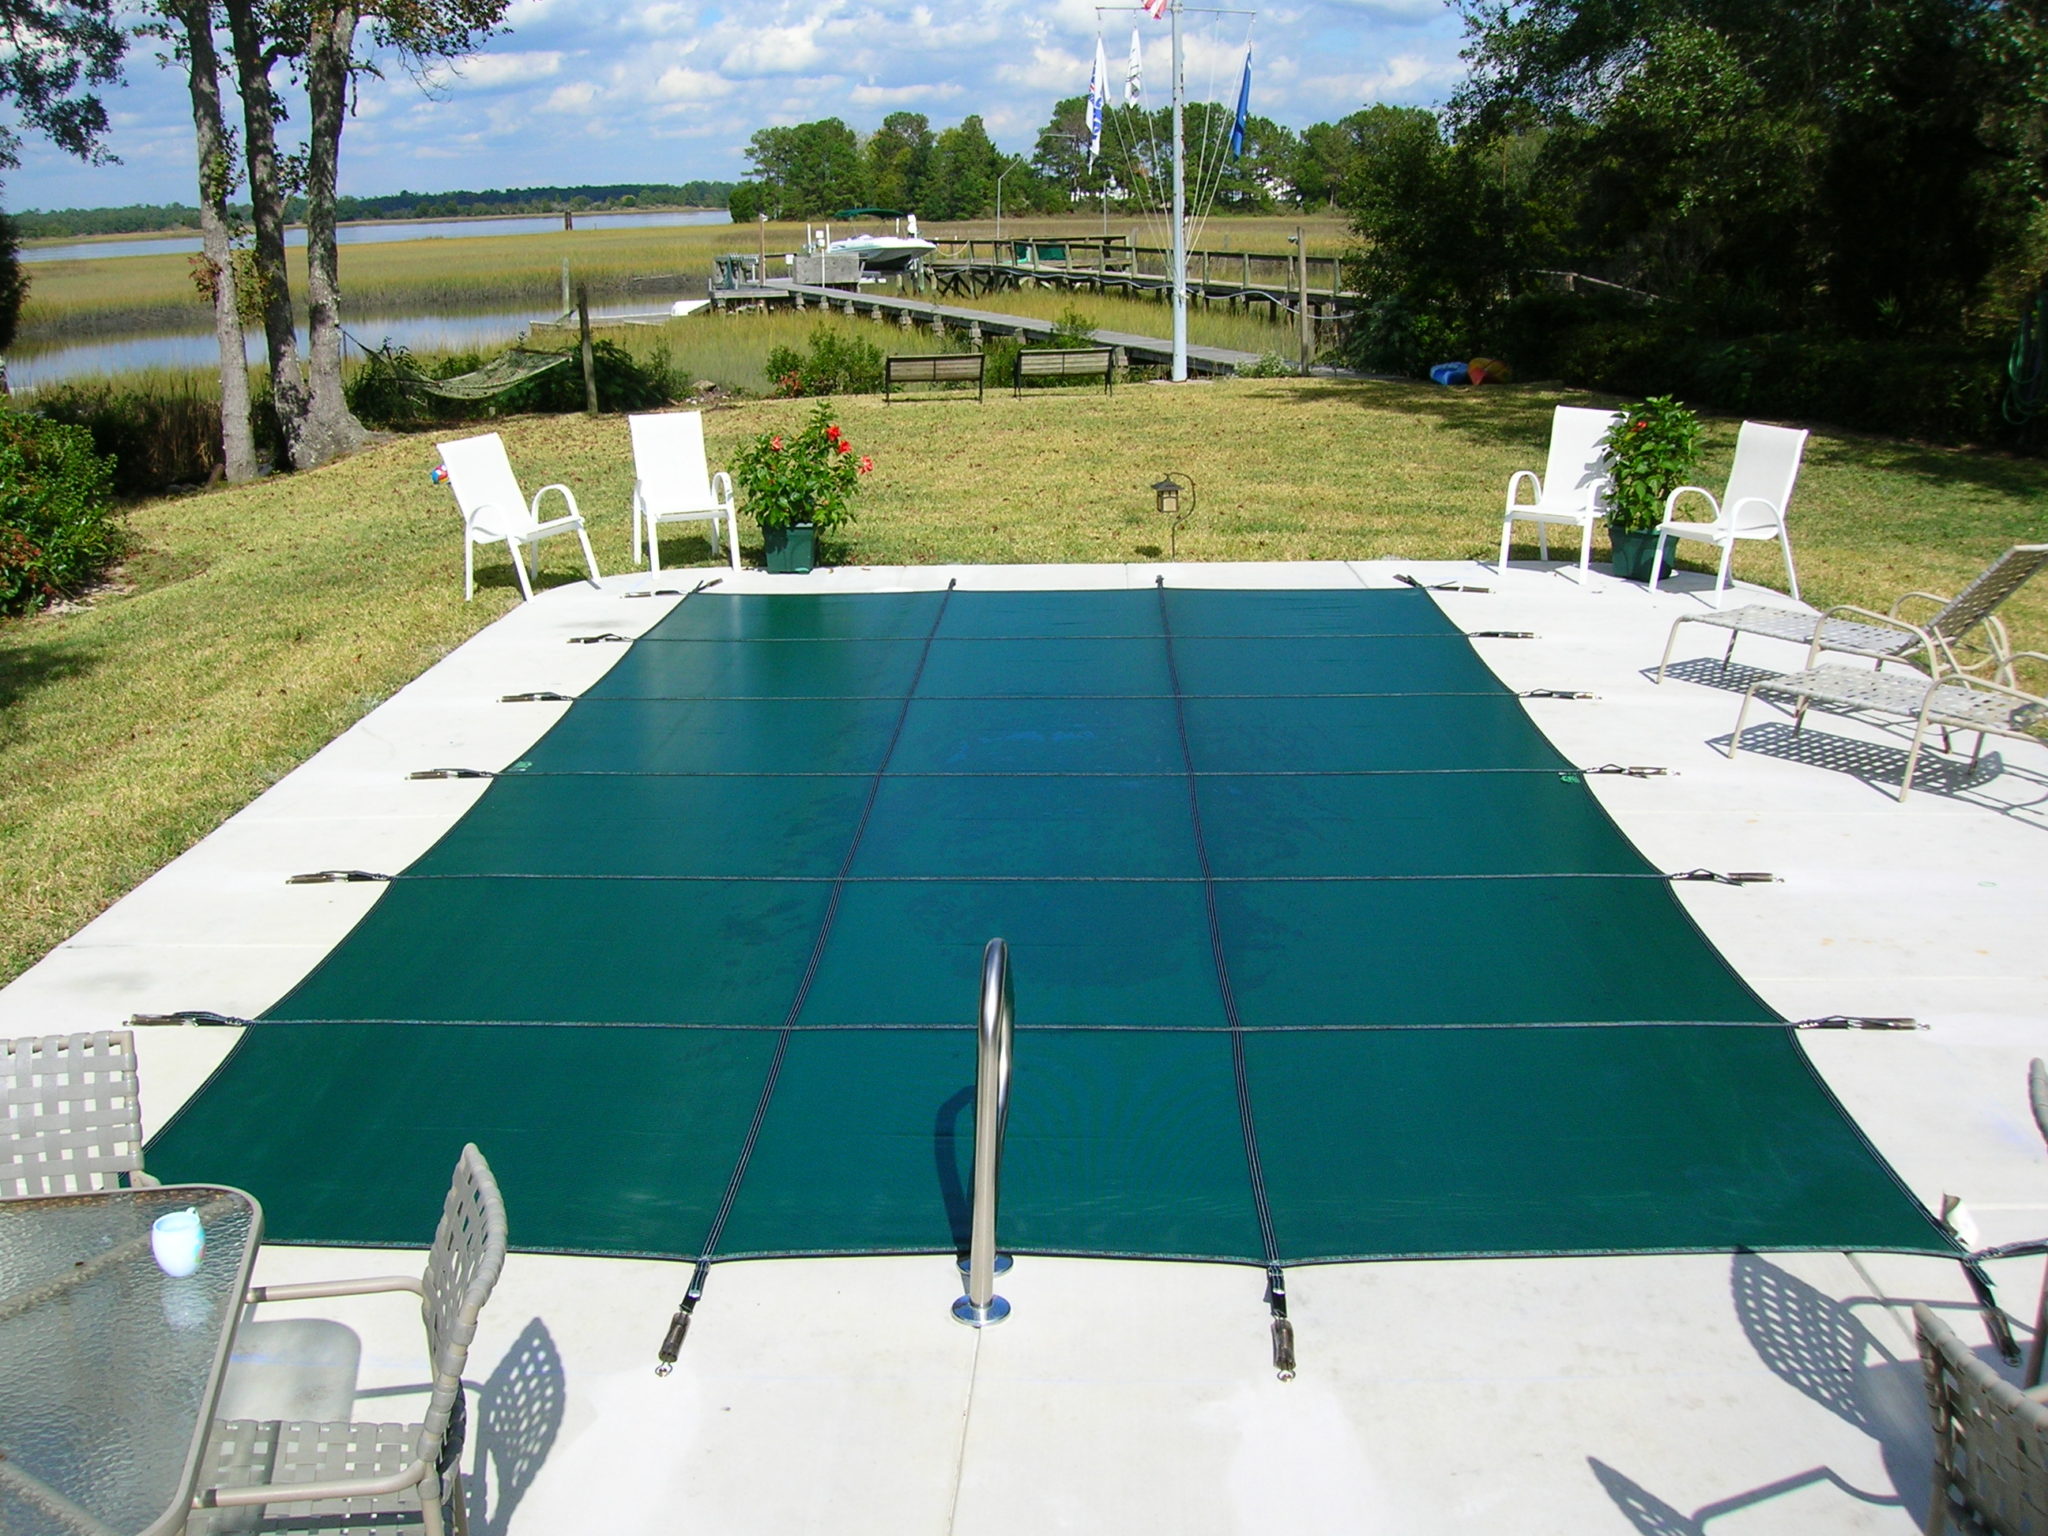 Linear Rectangular Shaped Pool with Winter Mesh Cover